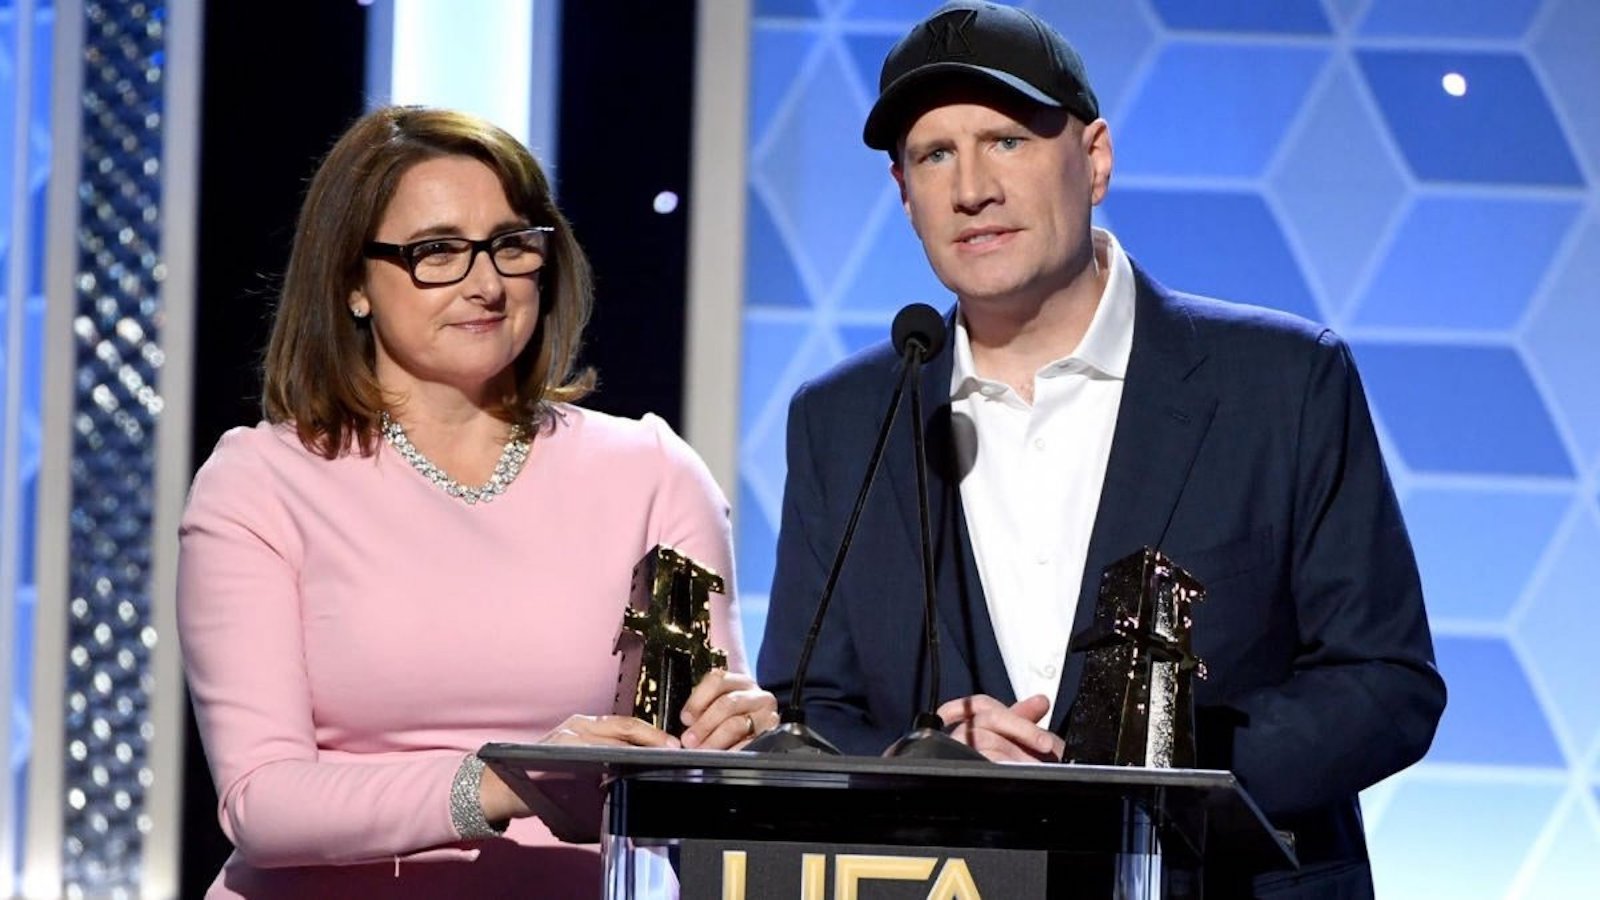 Marvel: the reasons for the breakup between Kevin Feige and Victoria Alonso revealed in a book